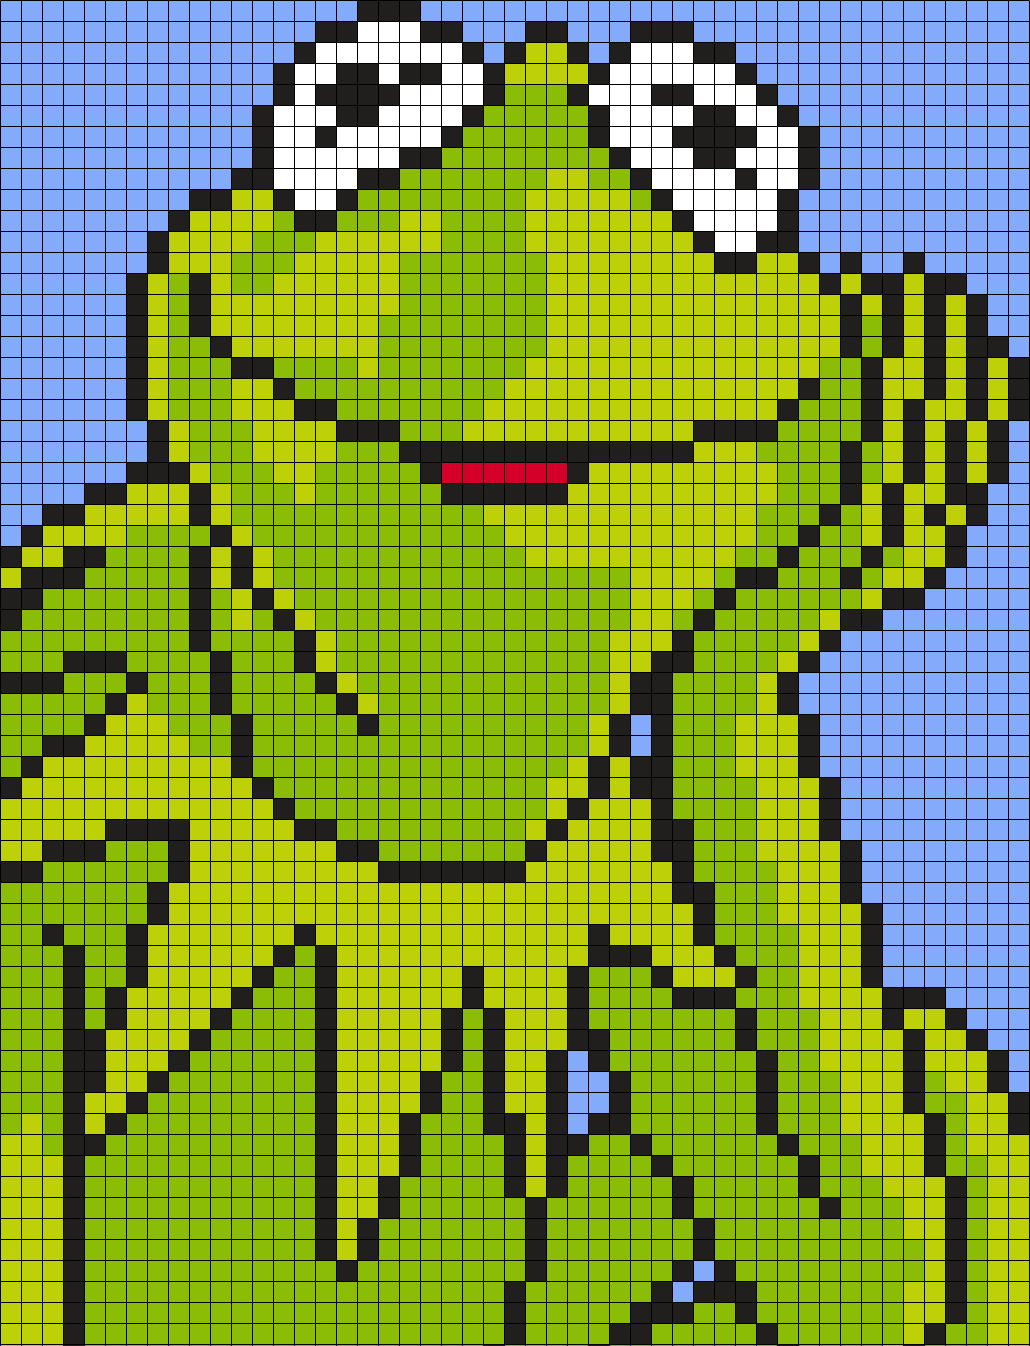 Kermit The Frog From The Muppets (Square)